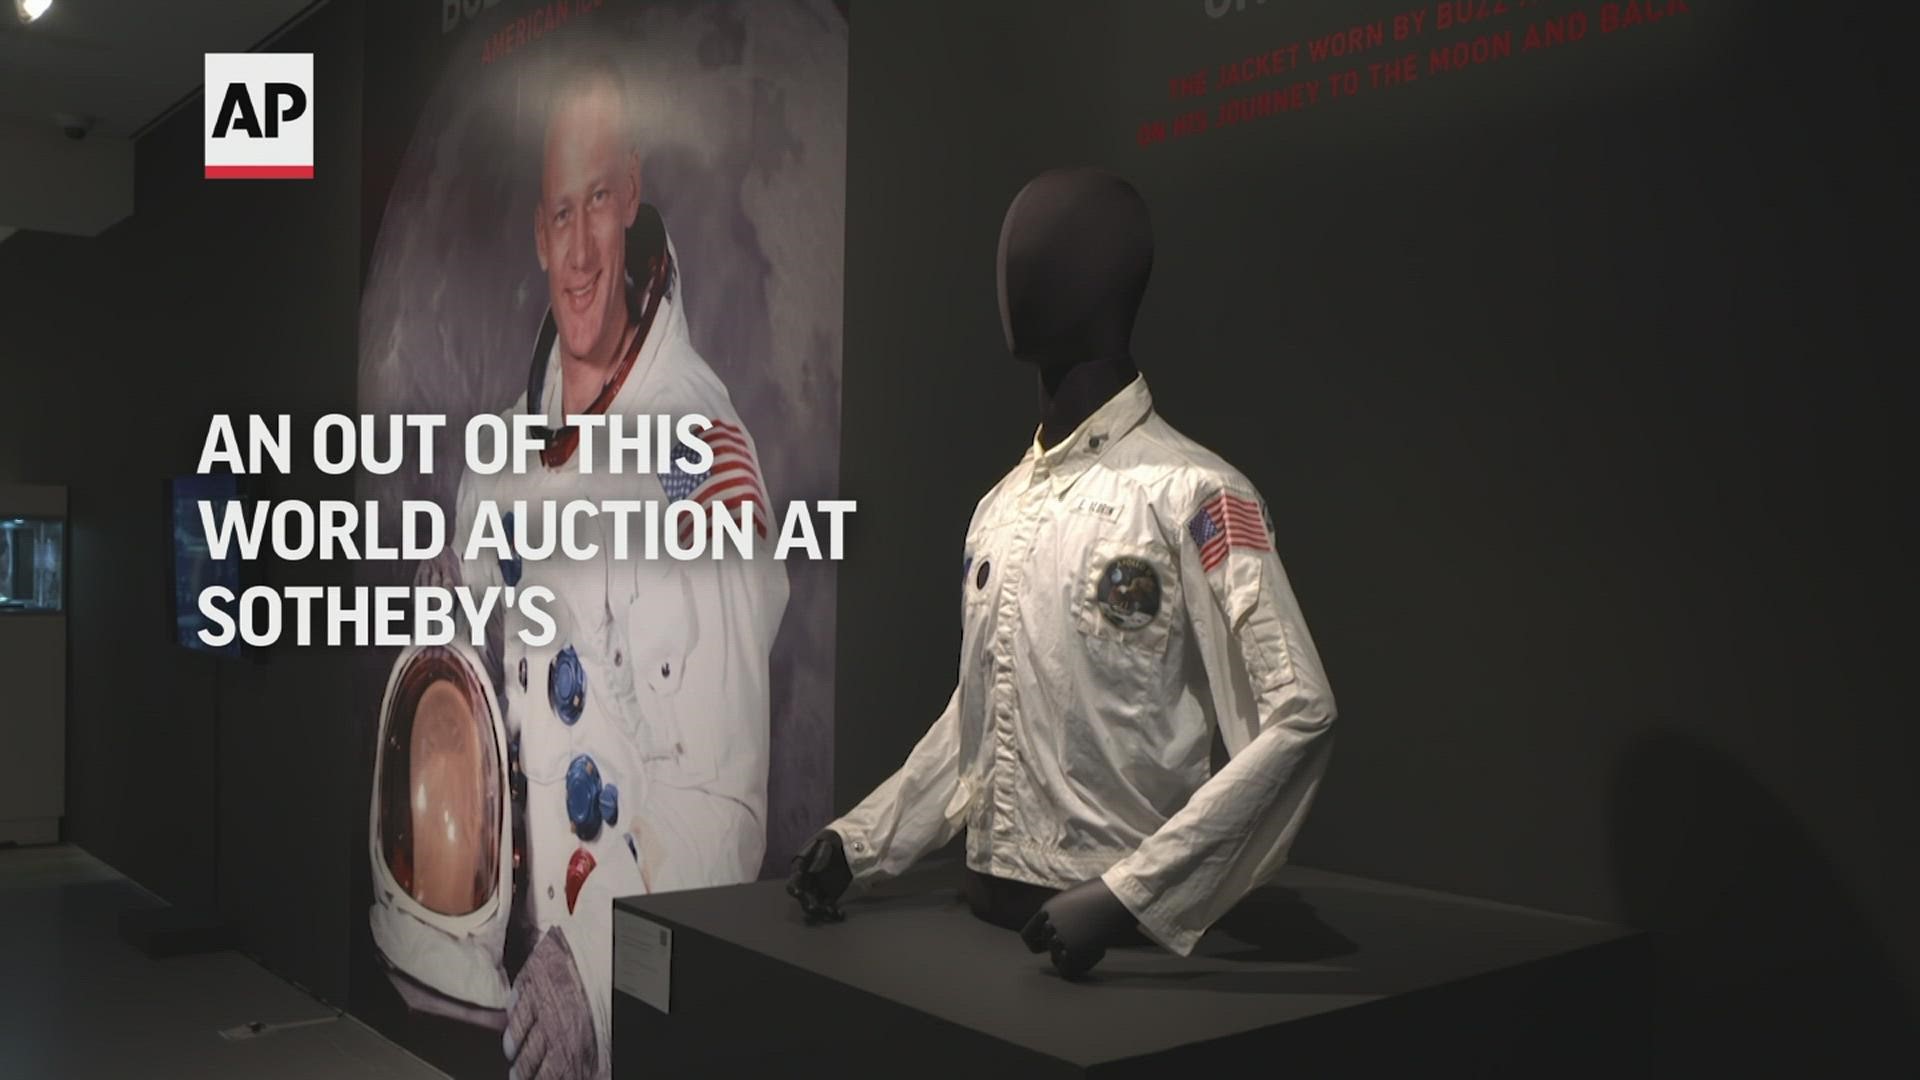 Sotheby's auctioned off Buzz Aldrin's In-flight coverall jacket worn during the Apollo 11 mission to the moon.